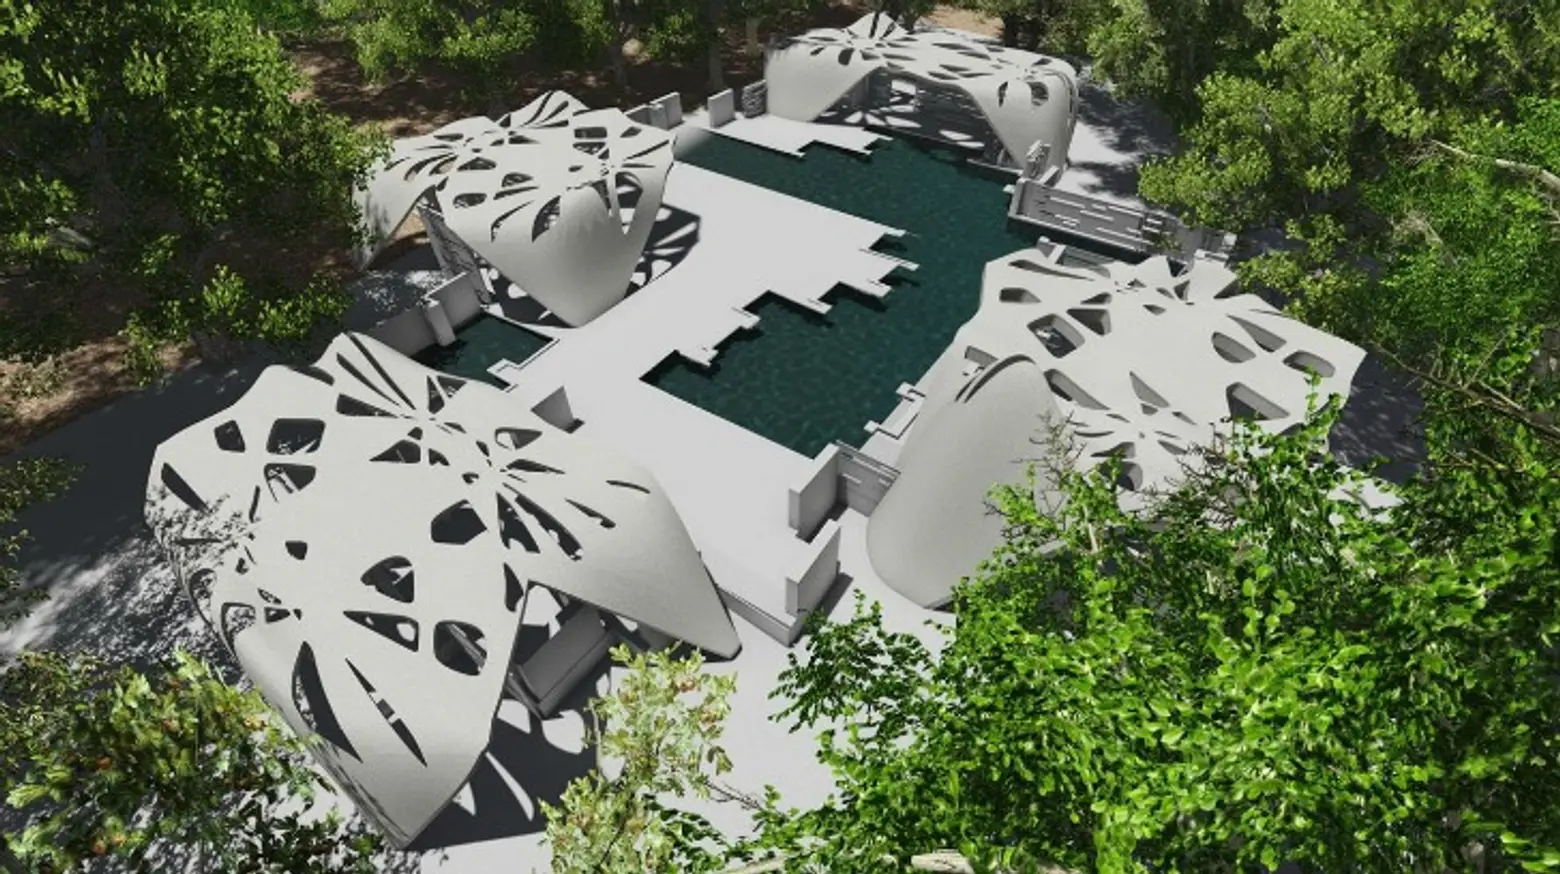 Renderings Revealed for the World’s First 3D-Printed Estate and Pool